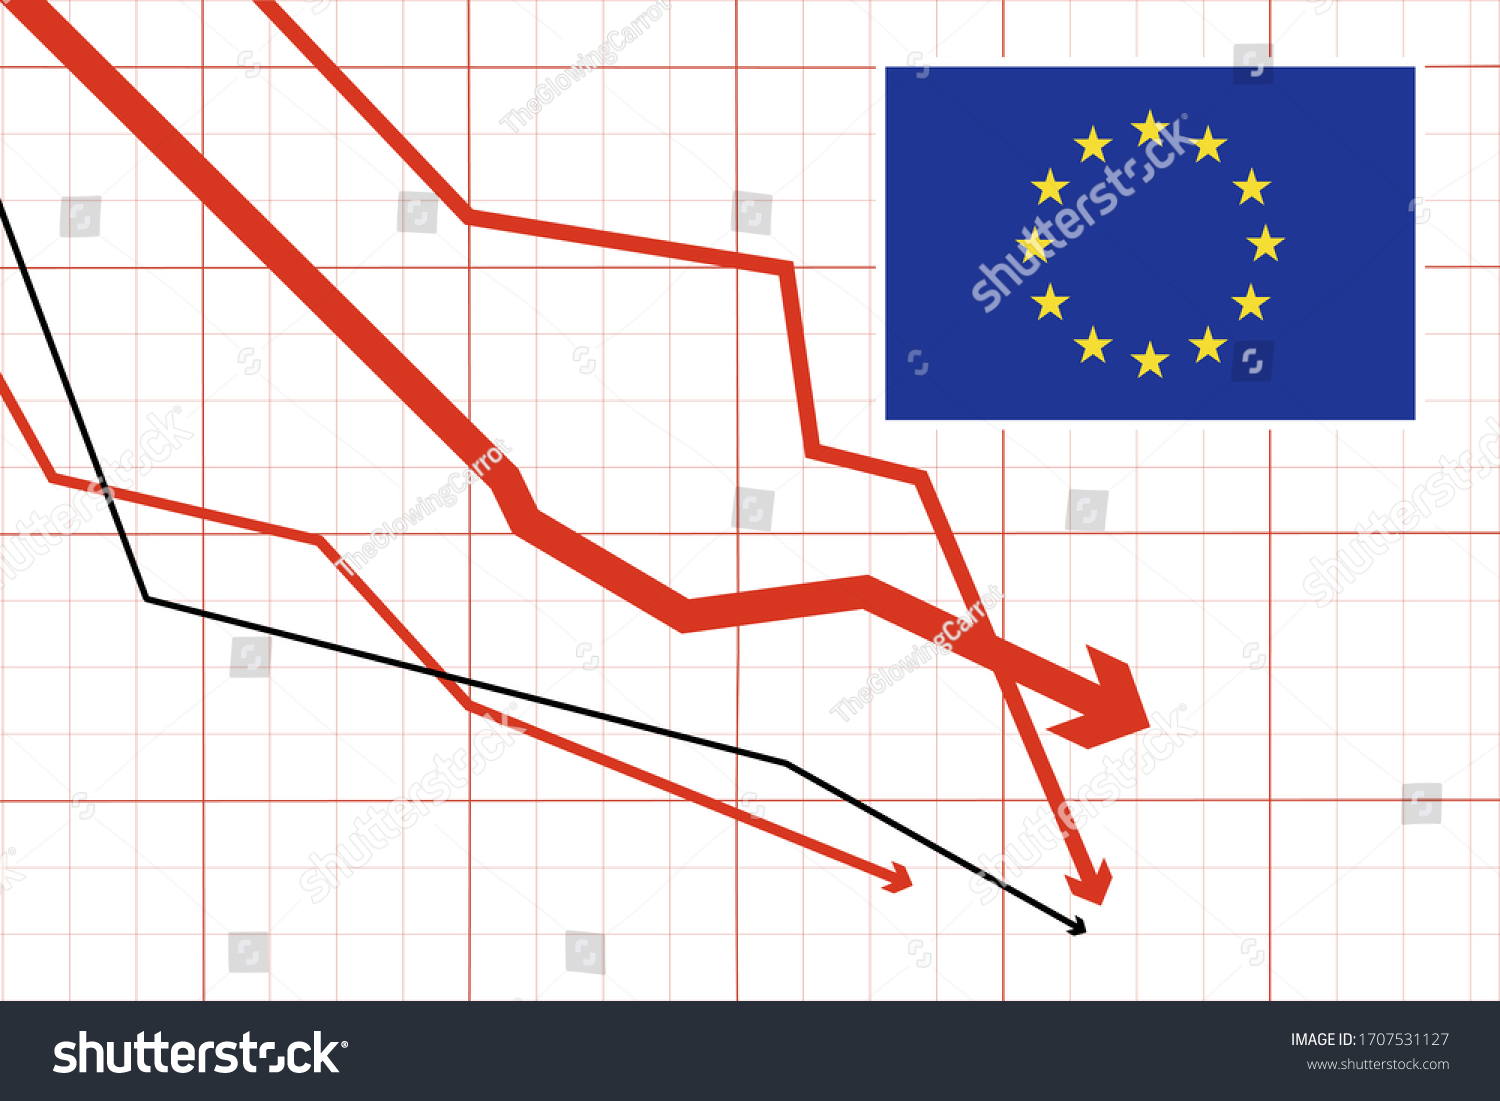 SVG of Info graph chart showing the flag of European Union and red arrows pointing down representing economic decline.  svg